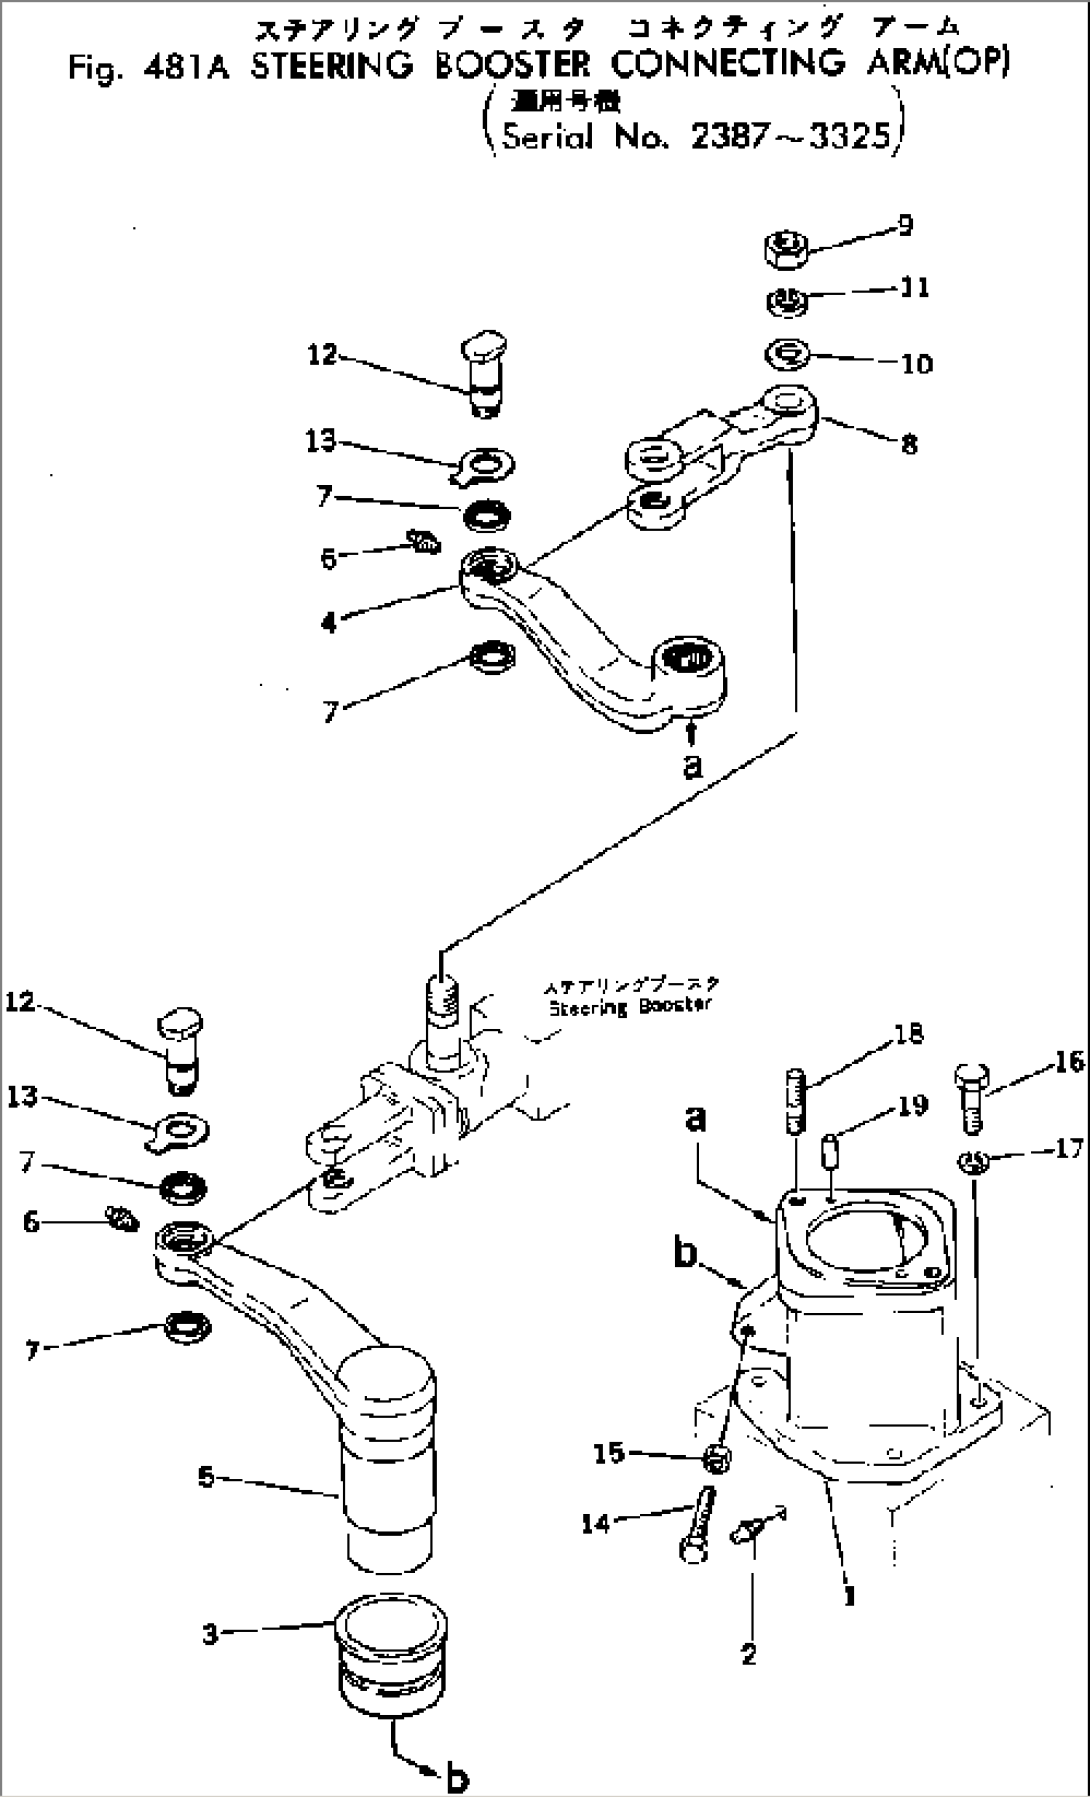 STEERING BOOSTER CONNECTING ARM (OP)(#2387-3325)